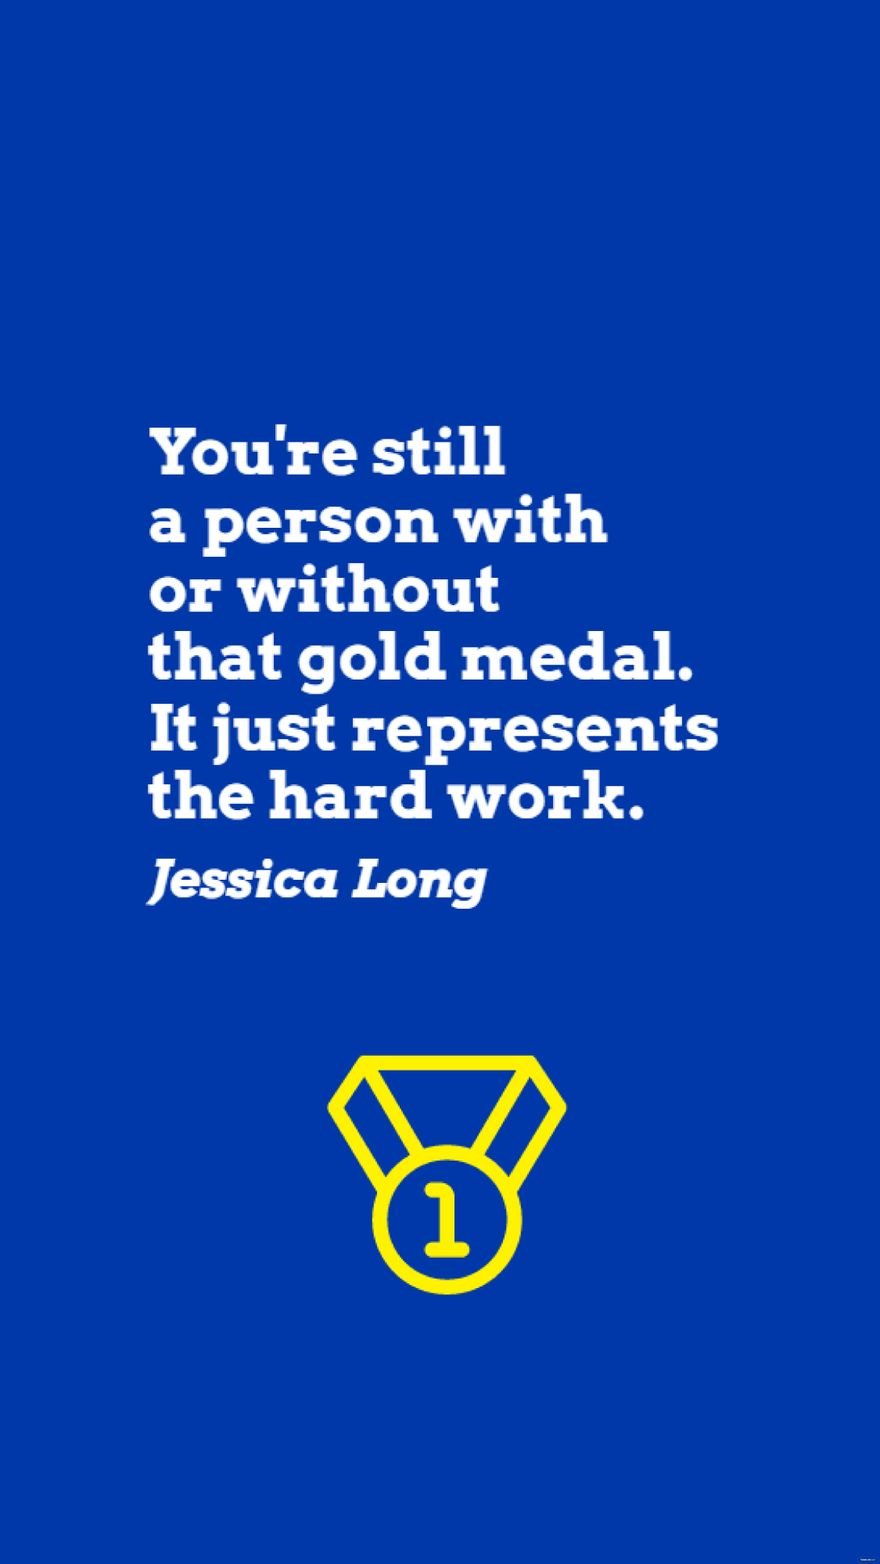 Free Jessica Long - You're still a person with or without that gold medal. It just represents the hard work. in JPG